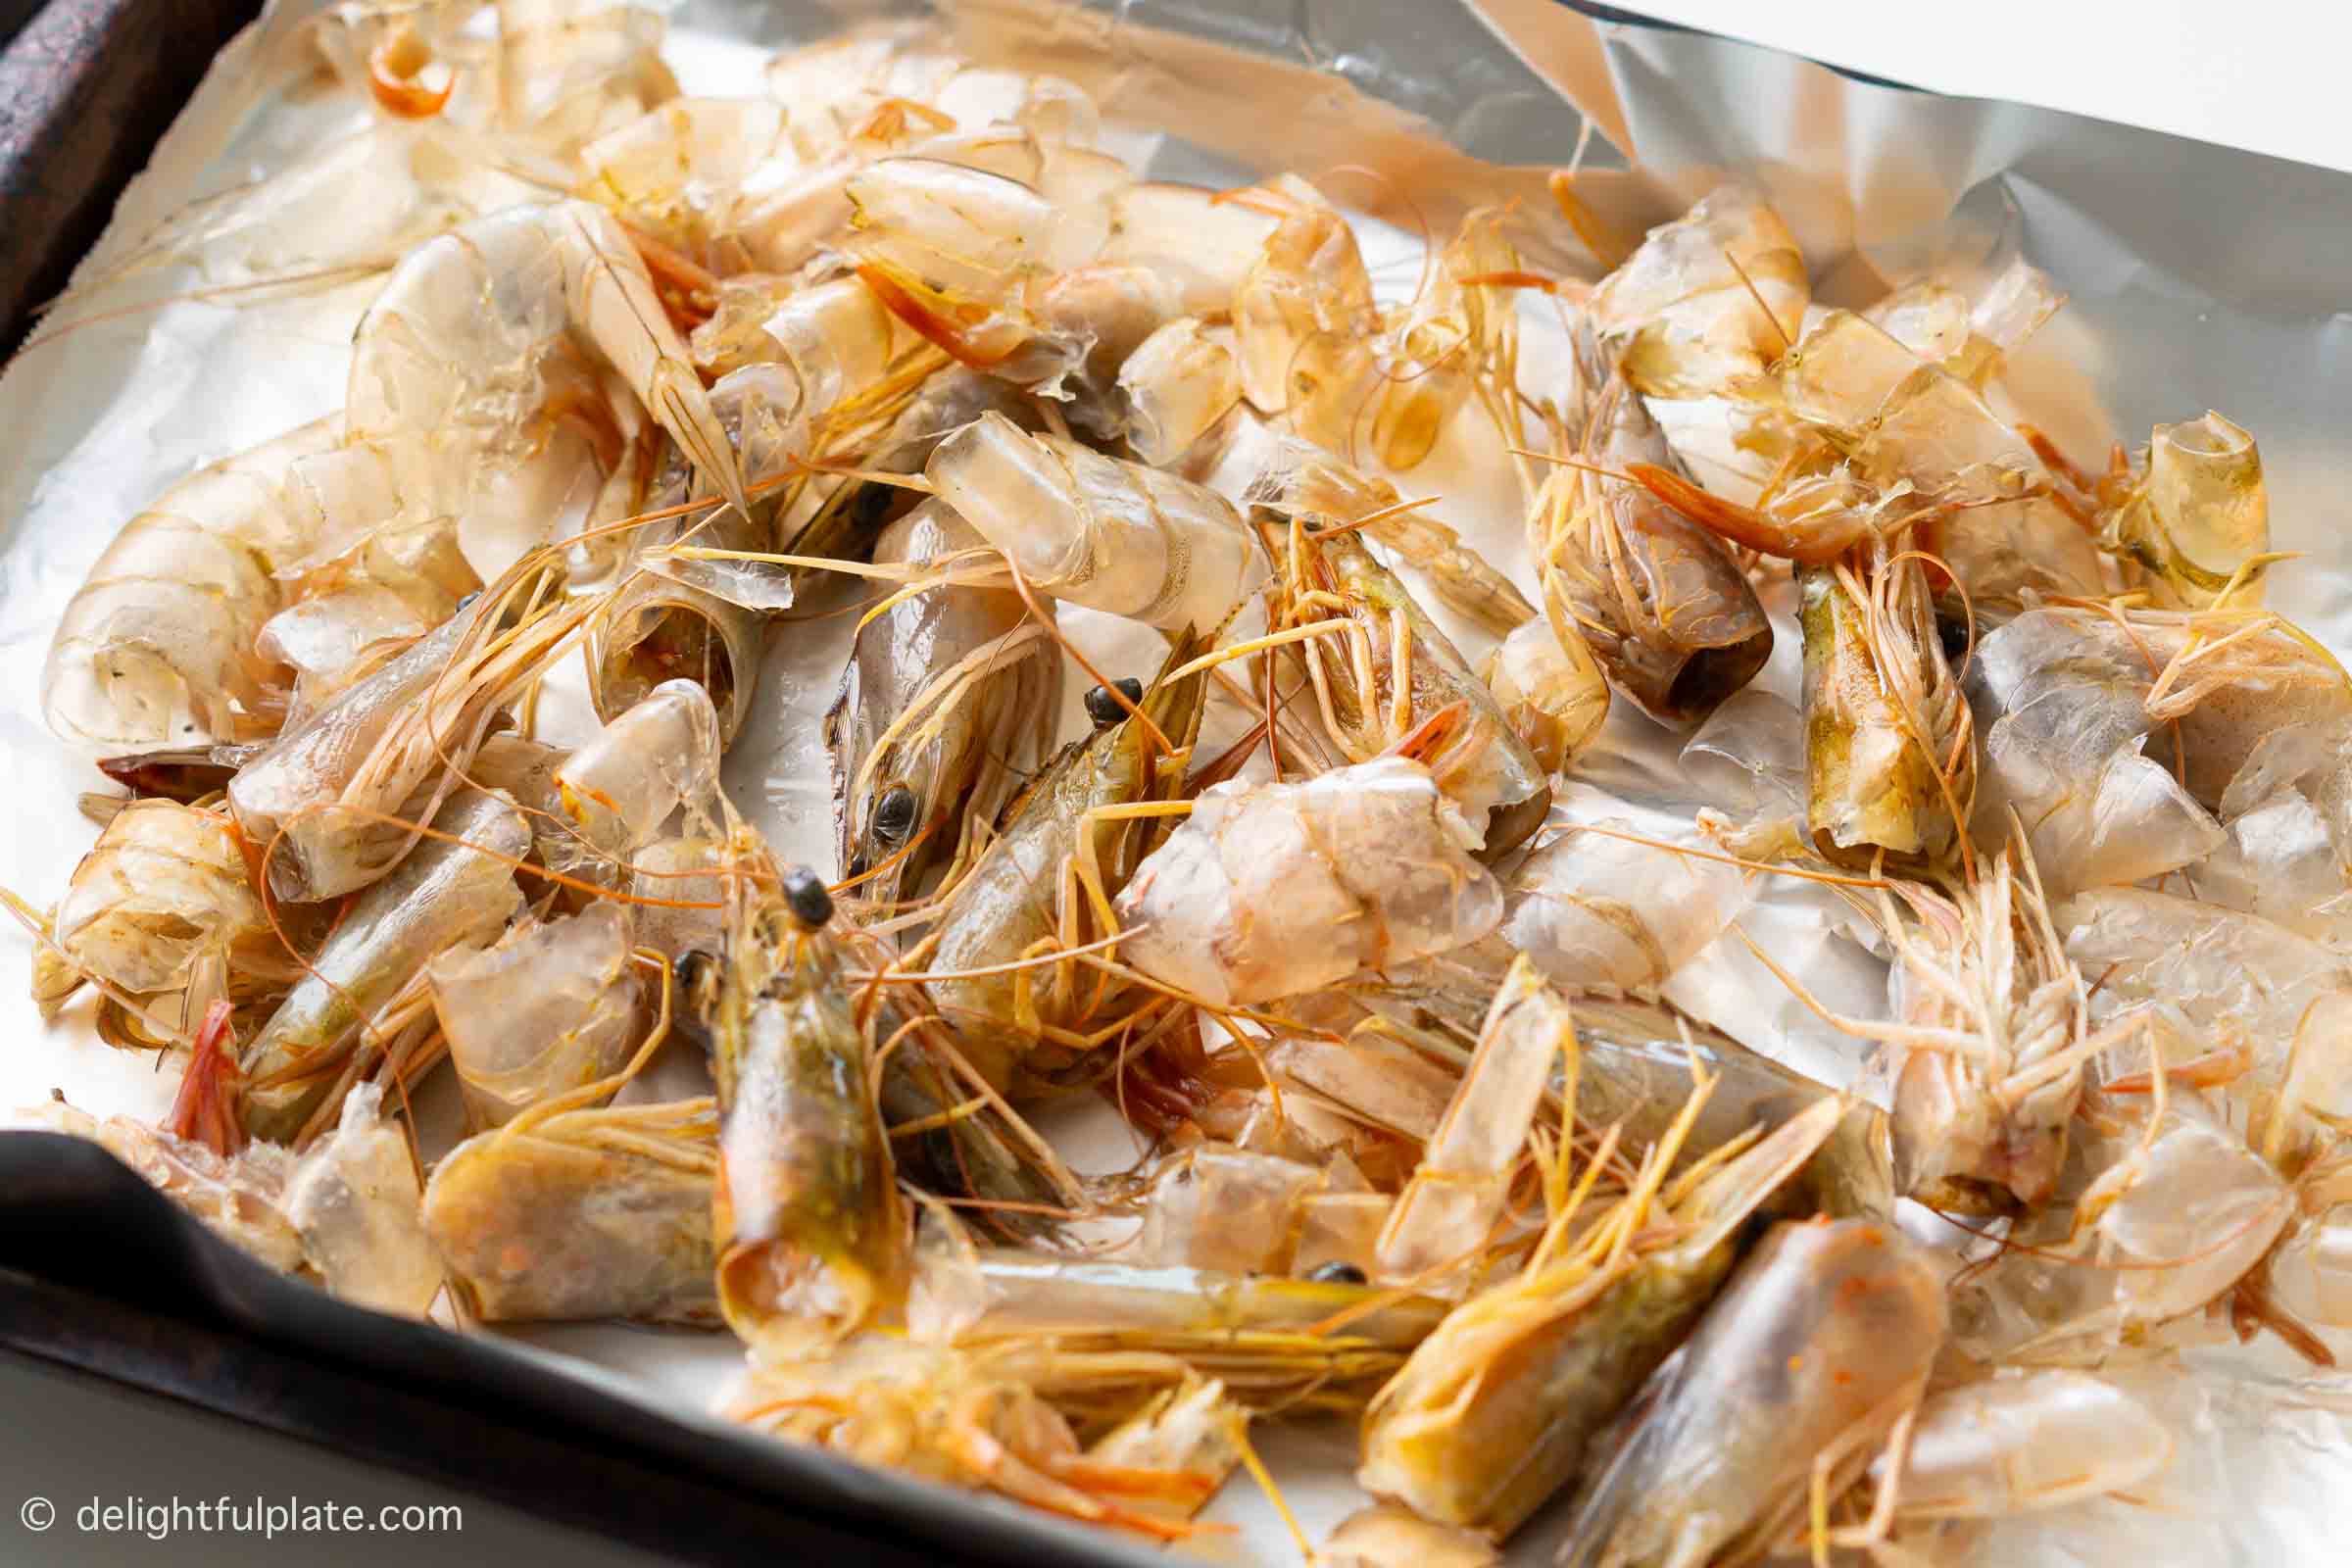 a tray of raw shrimp shells and heads.